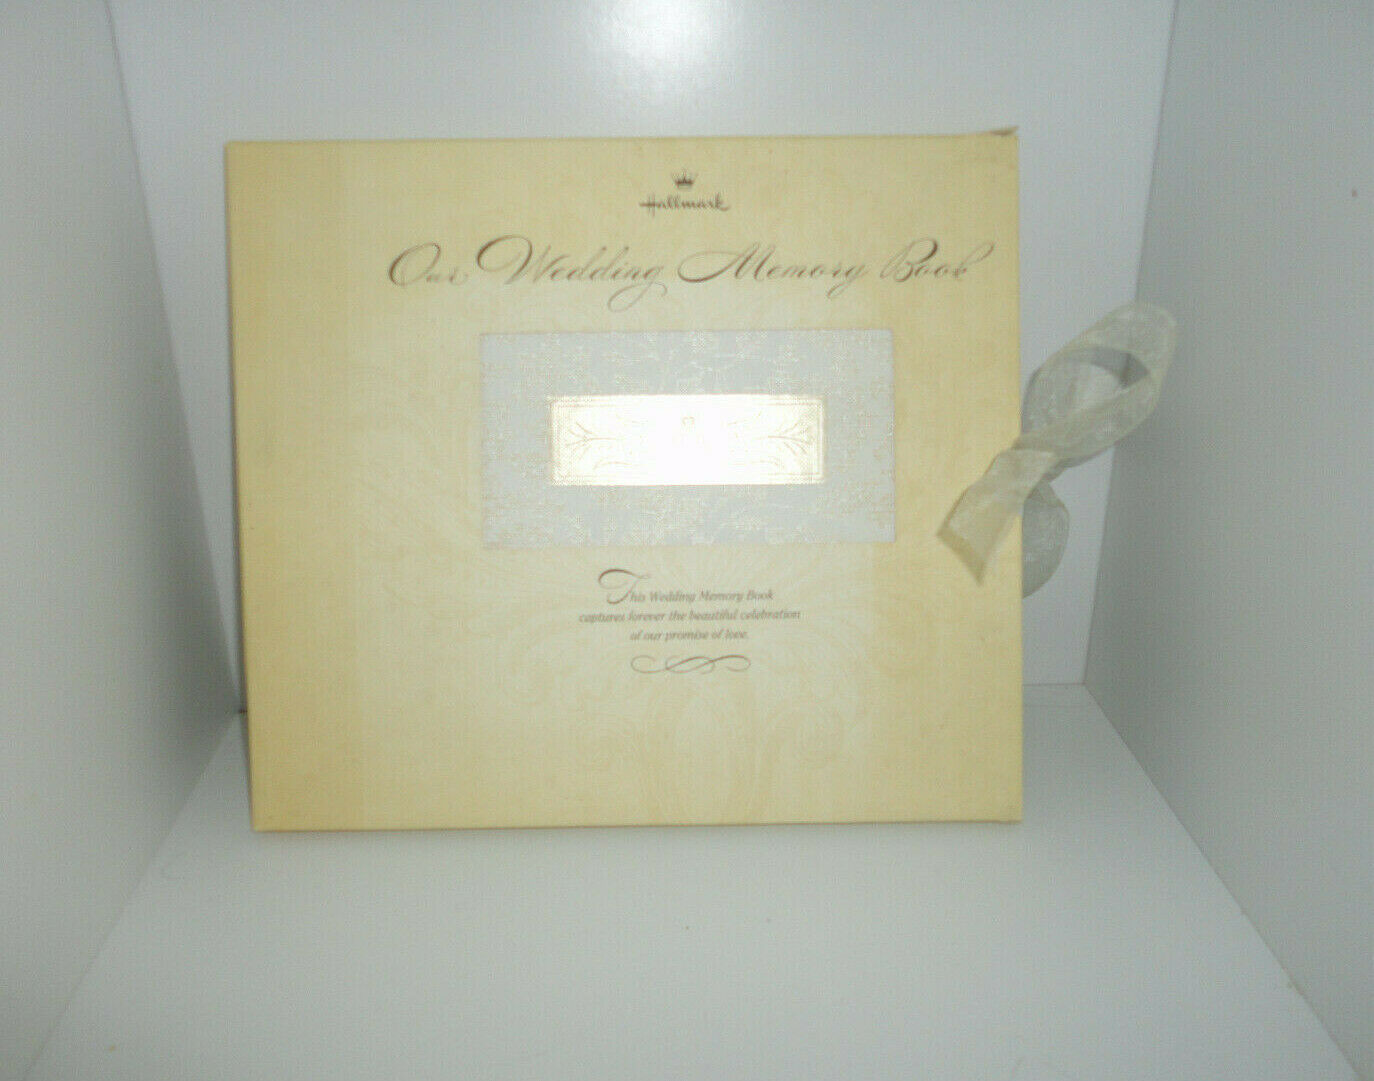 Our Wedding Memory Book New!!